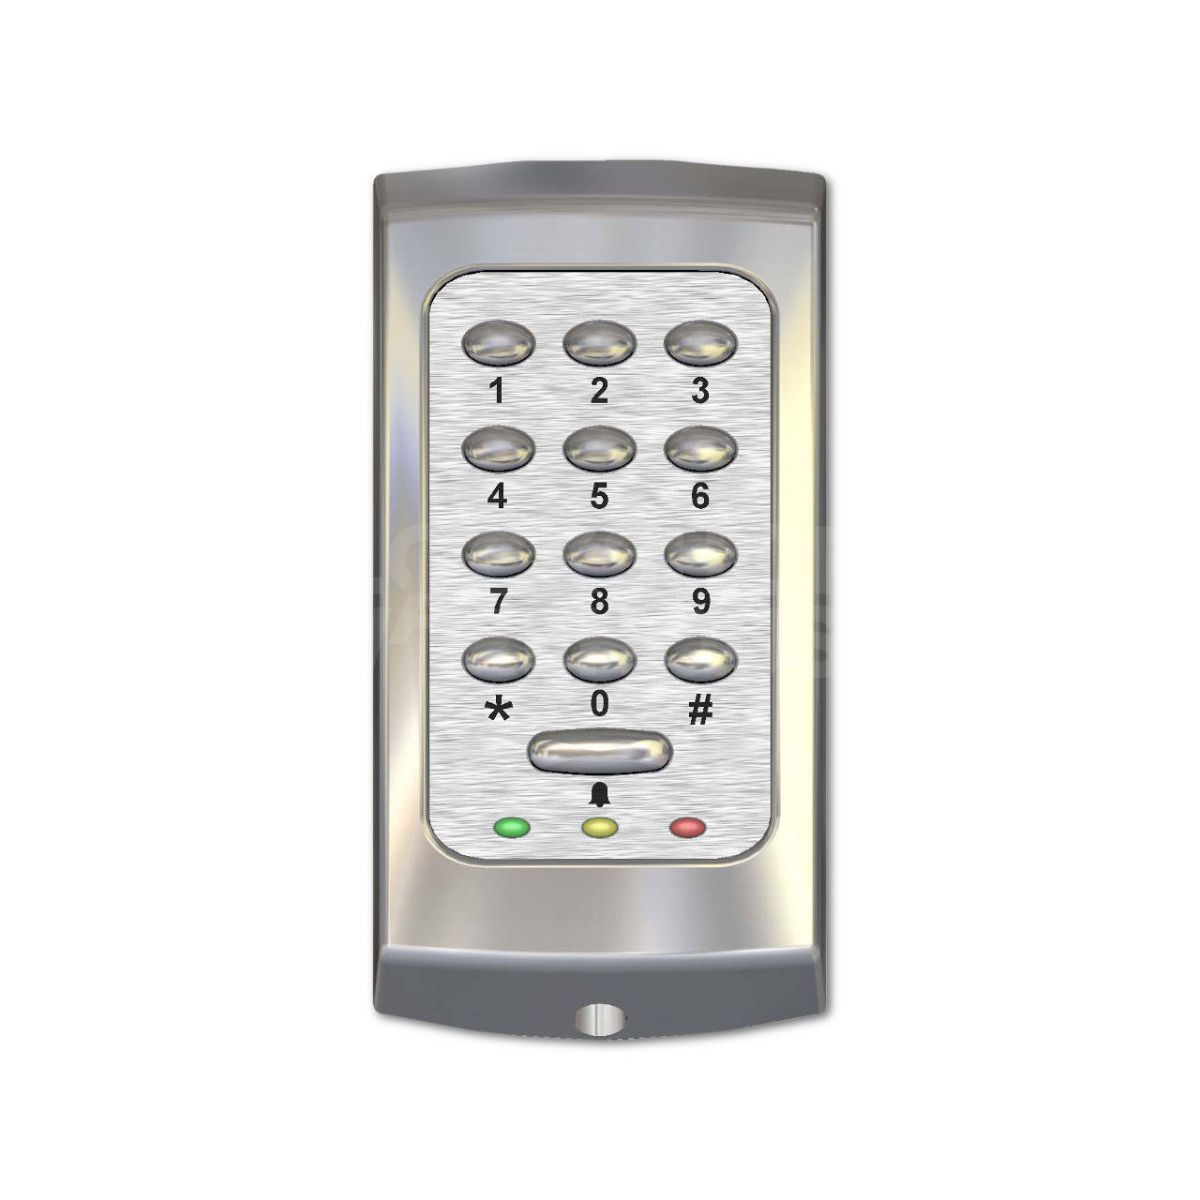 Paxton TouchLock Compact 200 Series Keypad Stainless Steel